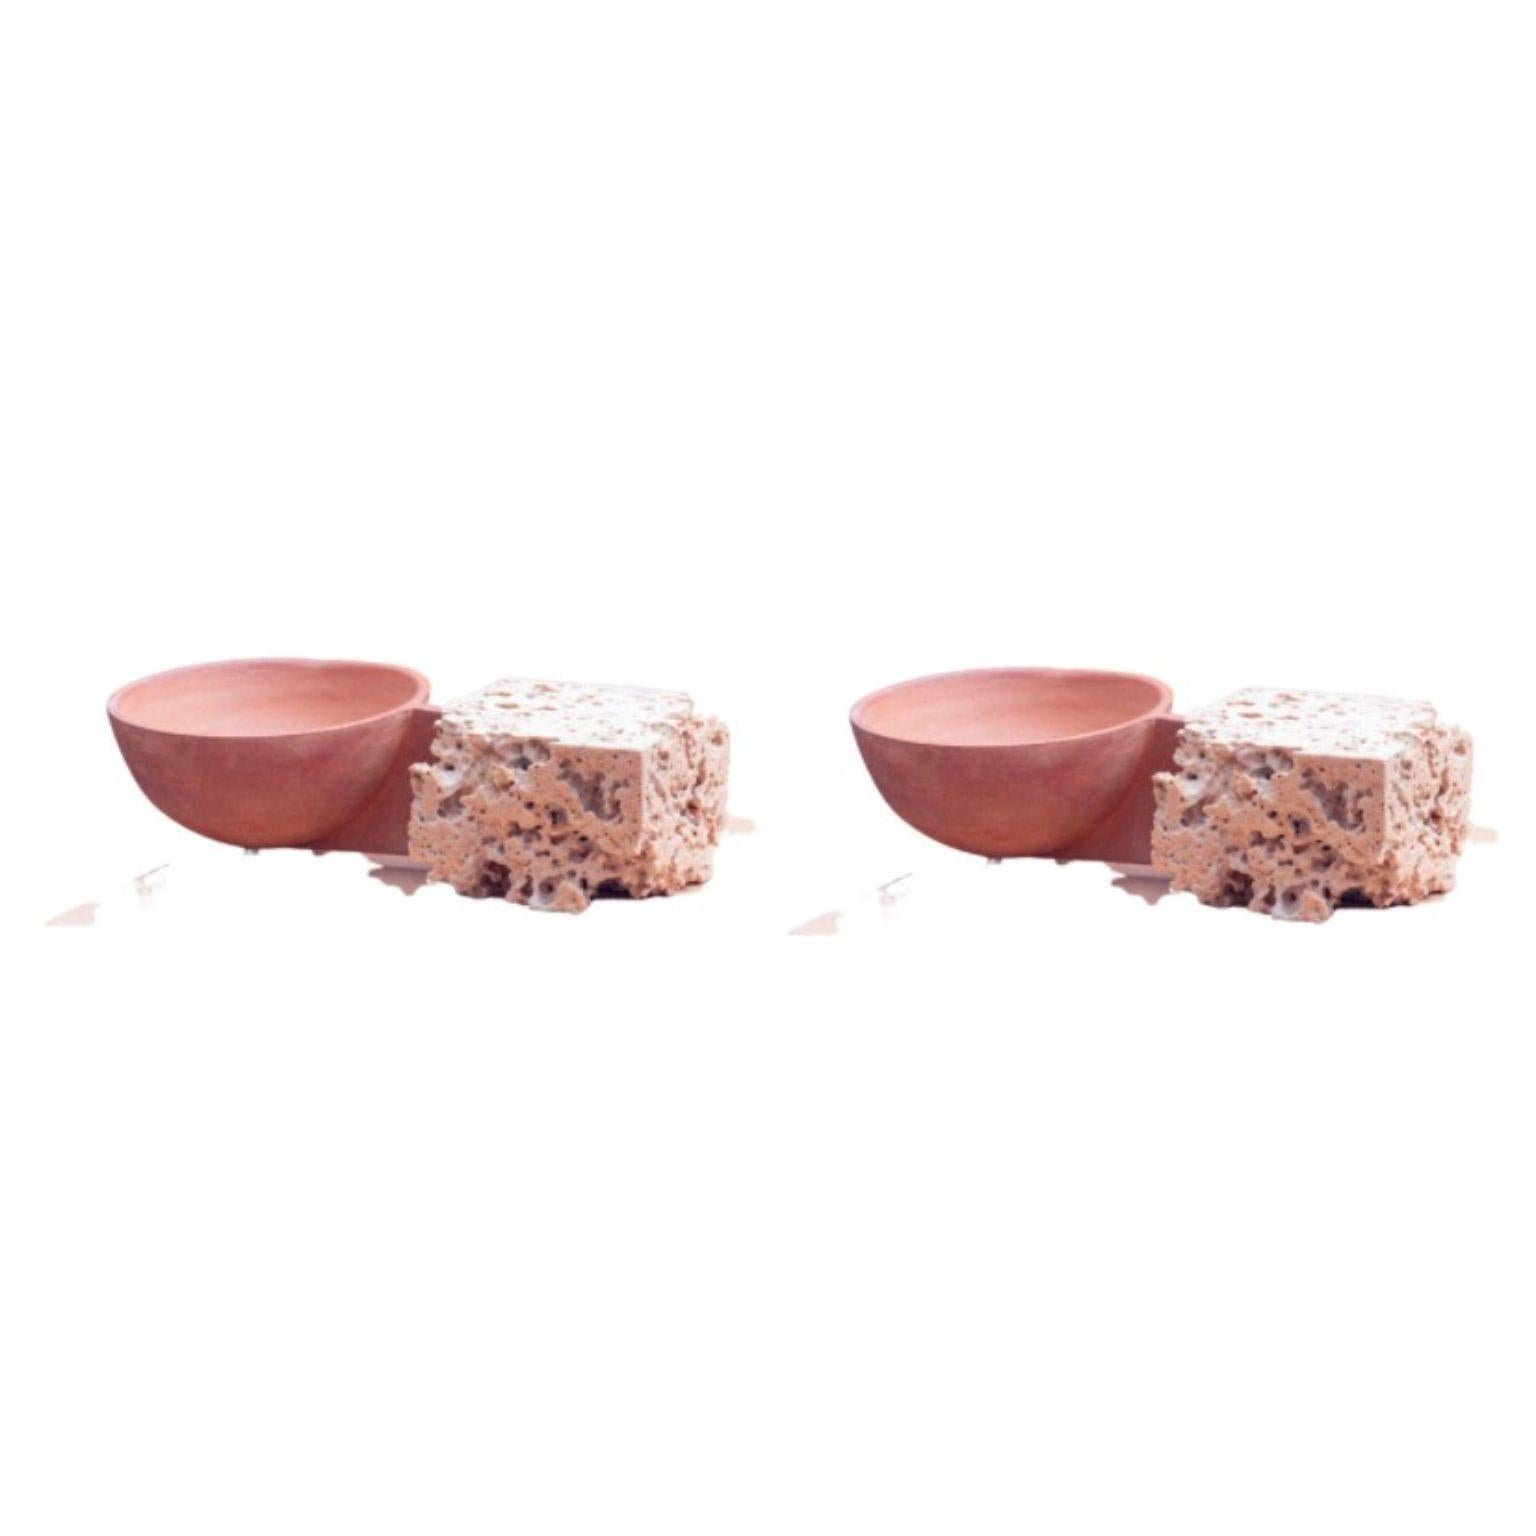 Set of 2 single bowls by Turbina
Dimensions: D 4.5 x W15.5 x H8 cm each
Materials: Cast Stone, Clay

The pieces are inspired by traditional pottery and made up intersecting earth and stone through fired clay and stone cast. The concept starts from